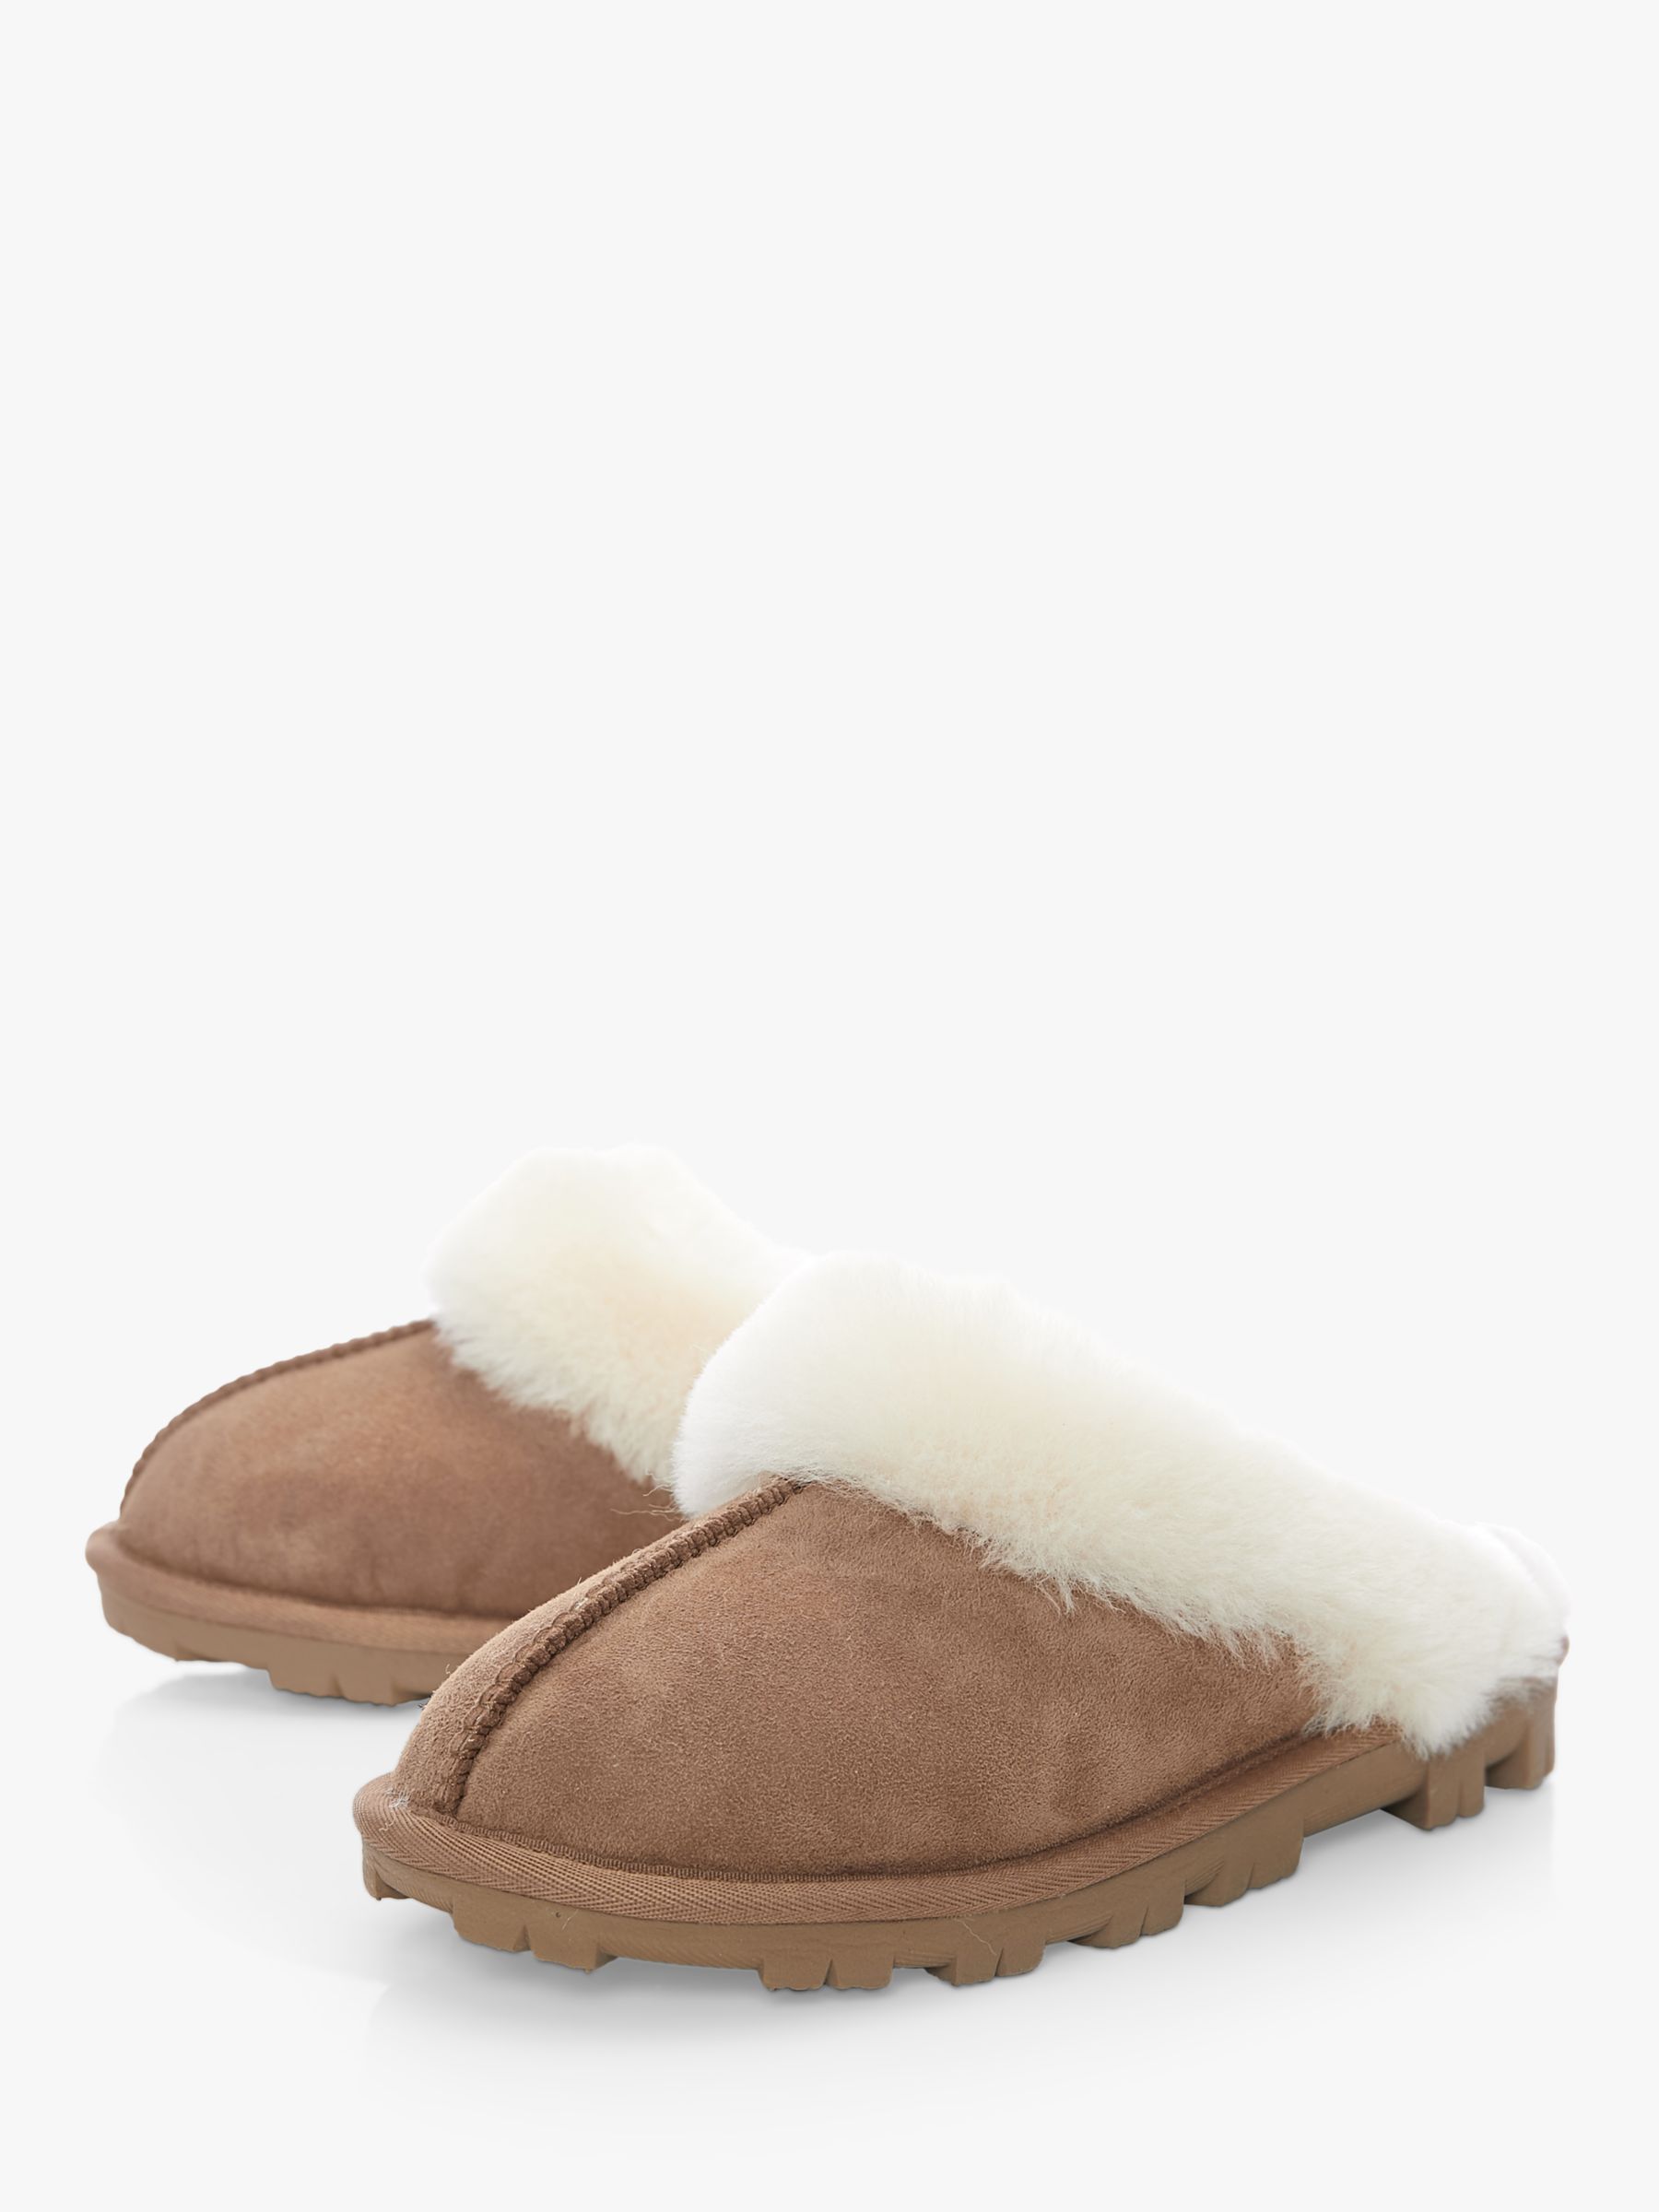 Moda In Pelle Cosie Sheepskin Slippers Tan At John Lewis And Partners 1427